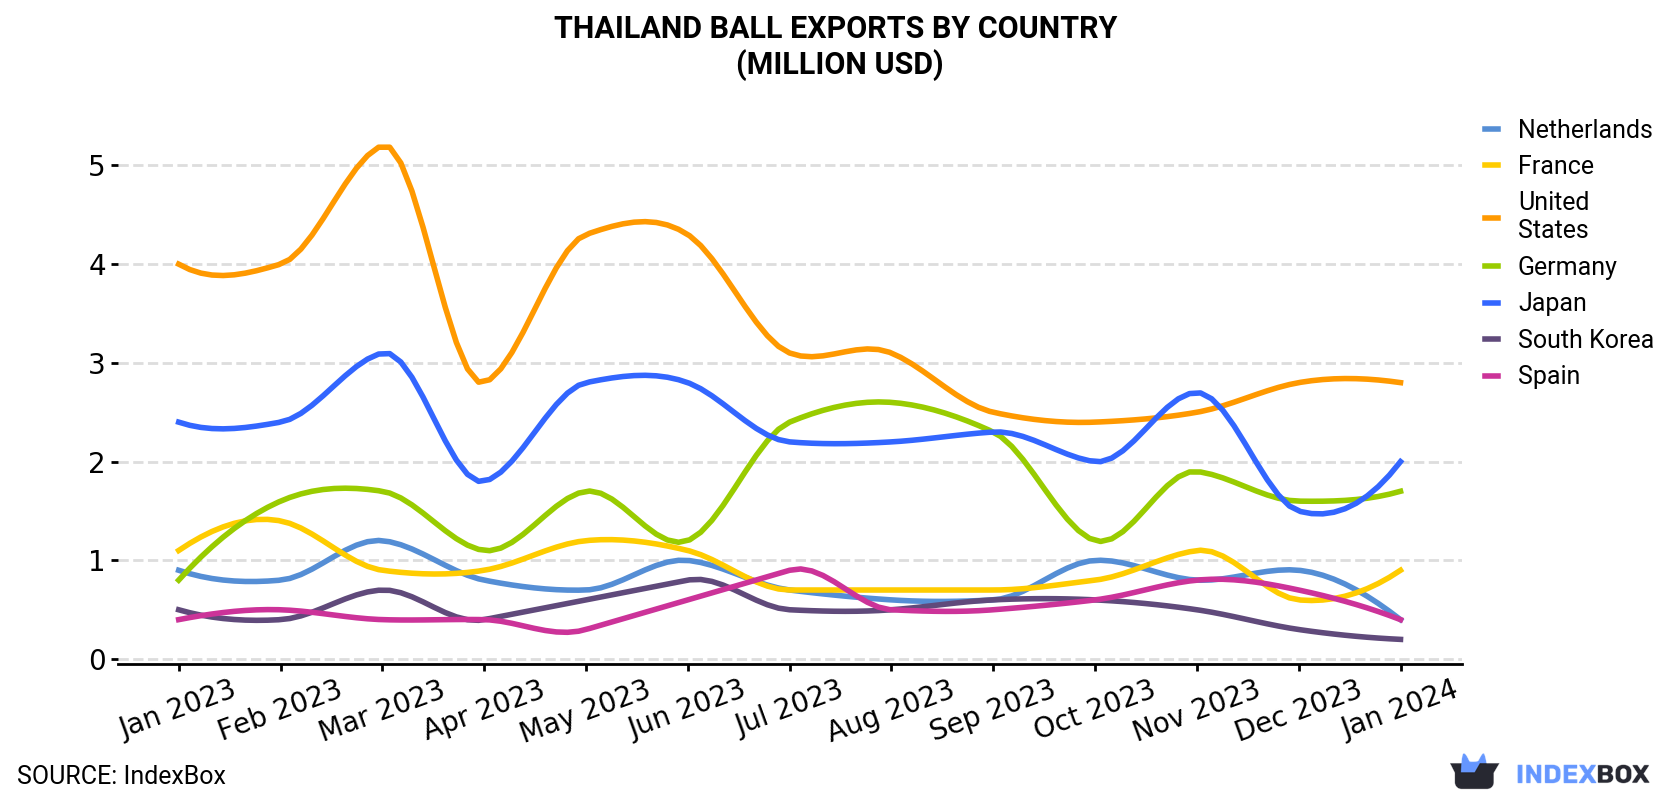 Thailand Ball Exports By Country (Million USD)